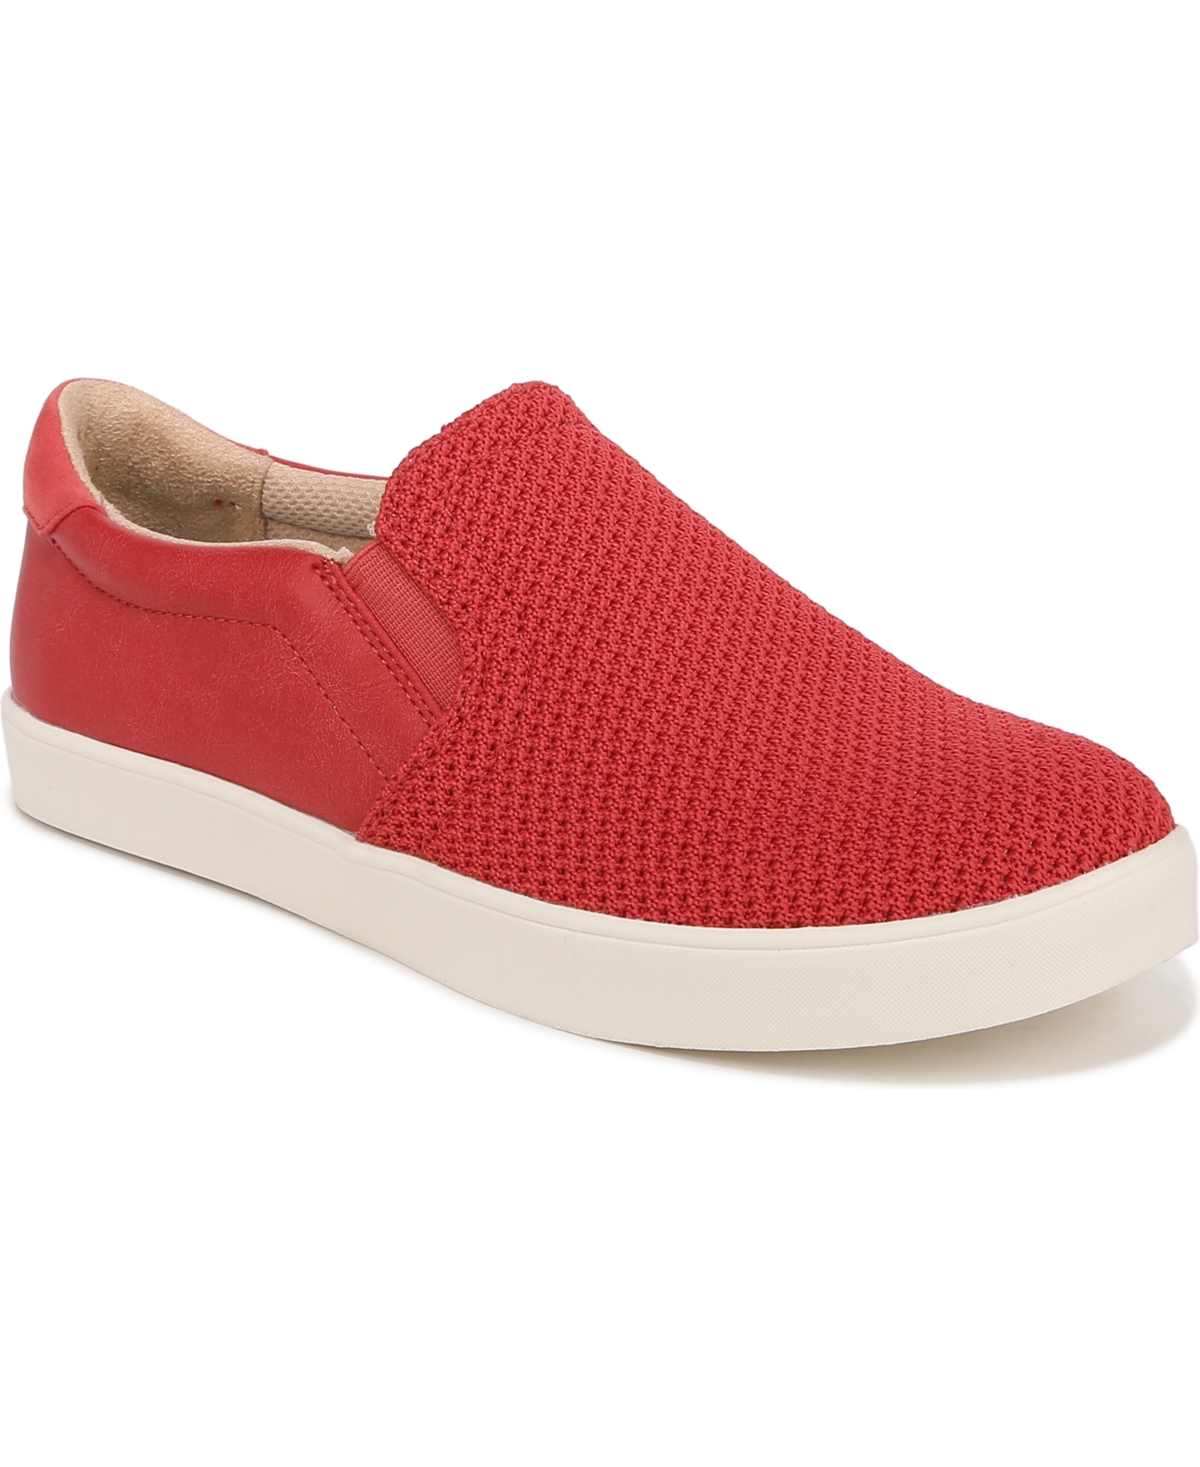 Dr. Scholl's Women's Madison Mesh Slip-on Sneakers In Heritage Red Fabric